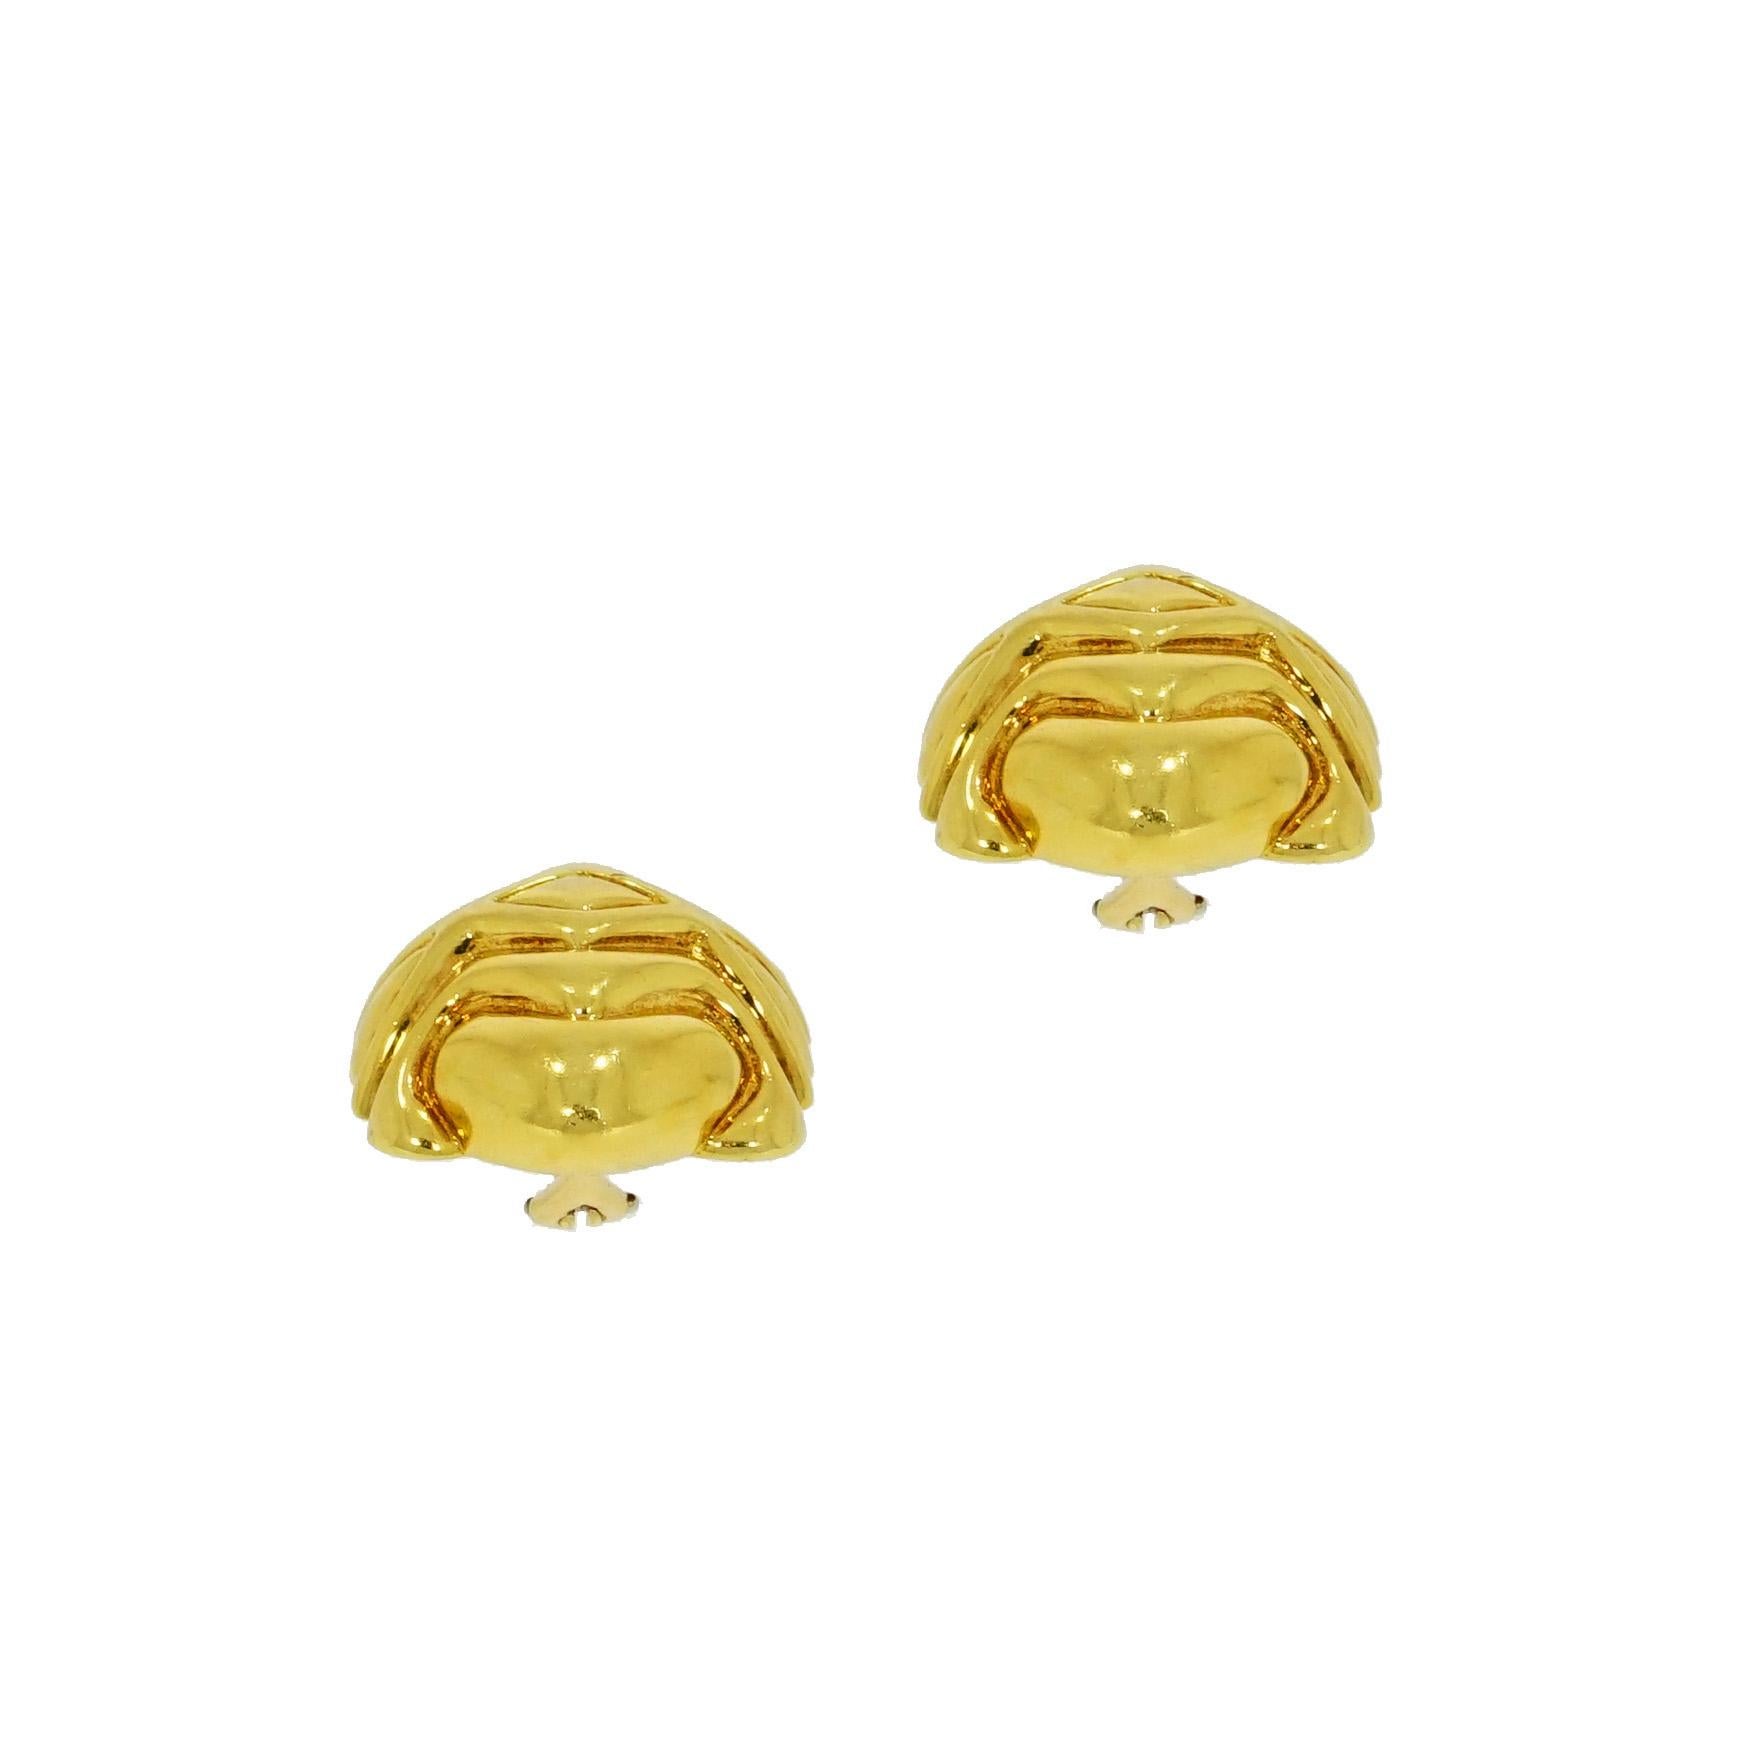 Estate Non pierced clip-on earrings circa 1970-80's. The design is decorated with a pattern and crafted in 18-karat yellow gold with high polished finishes, omega clip backs. Very pristine condition consistent with age and wear. They are elegant and